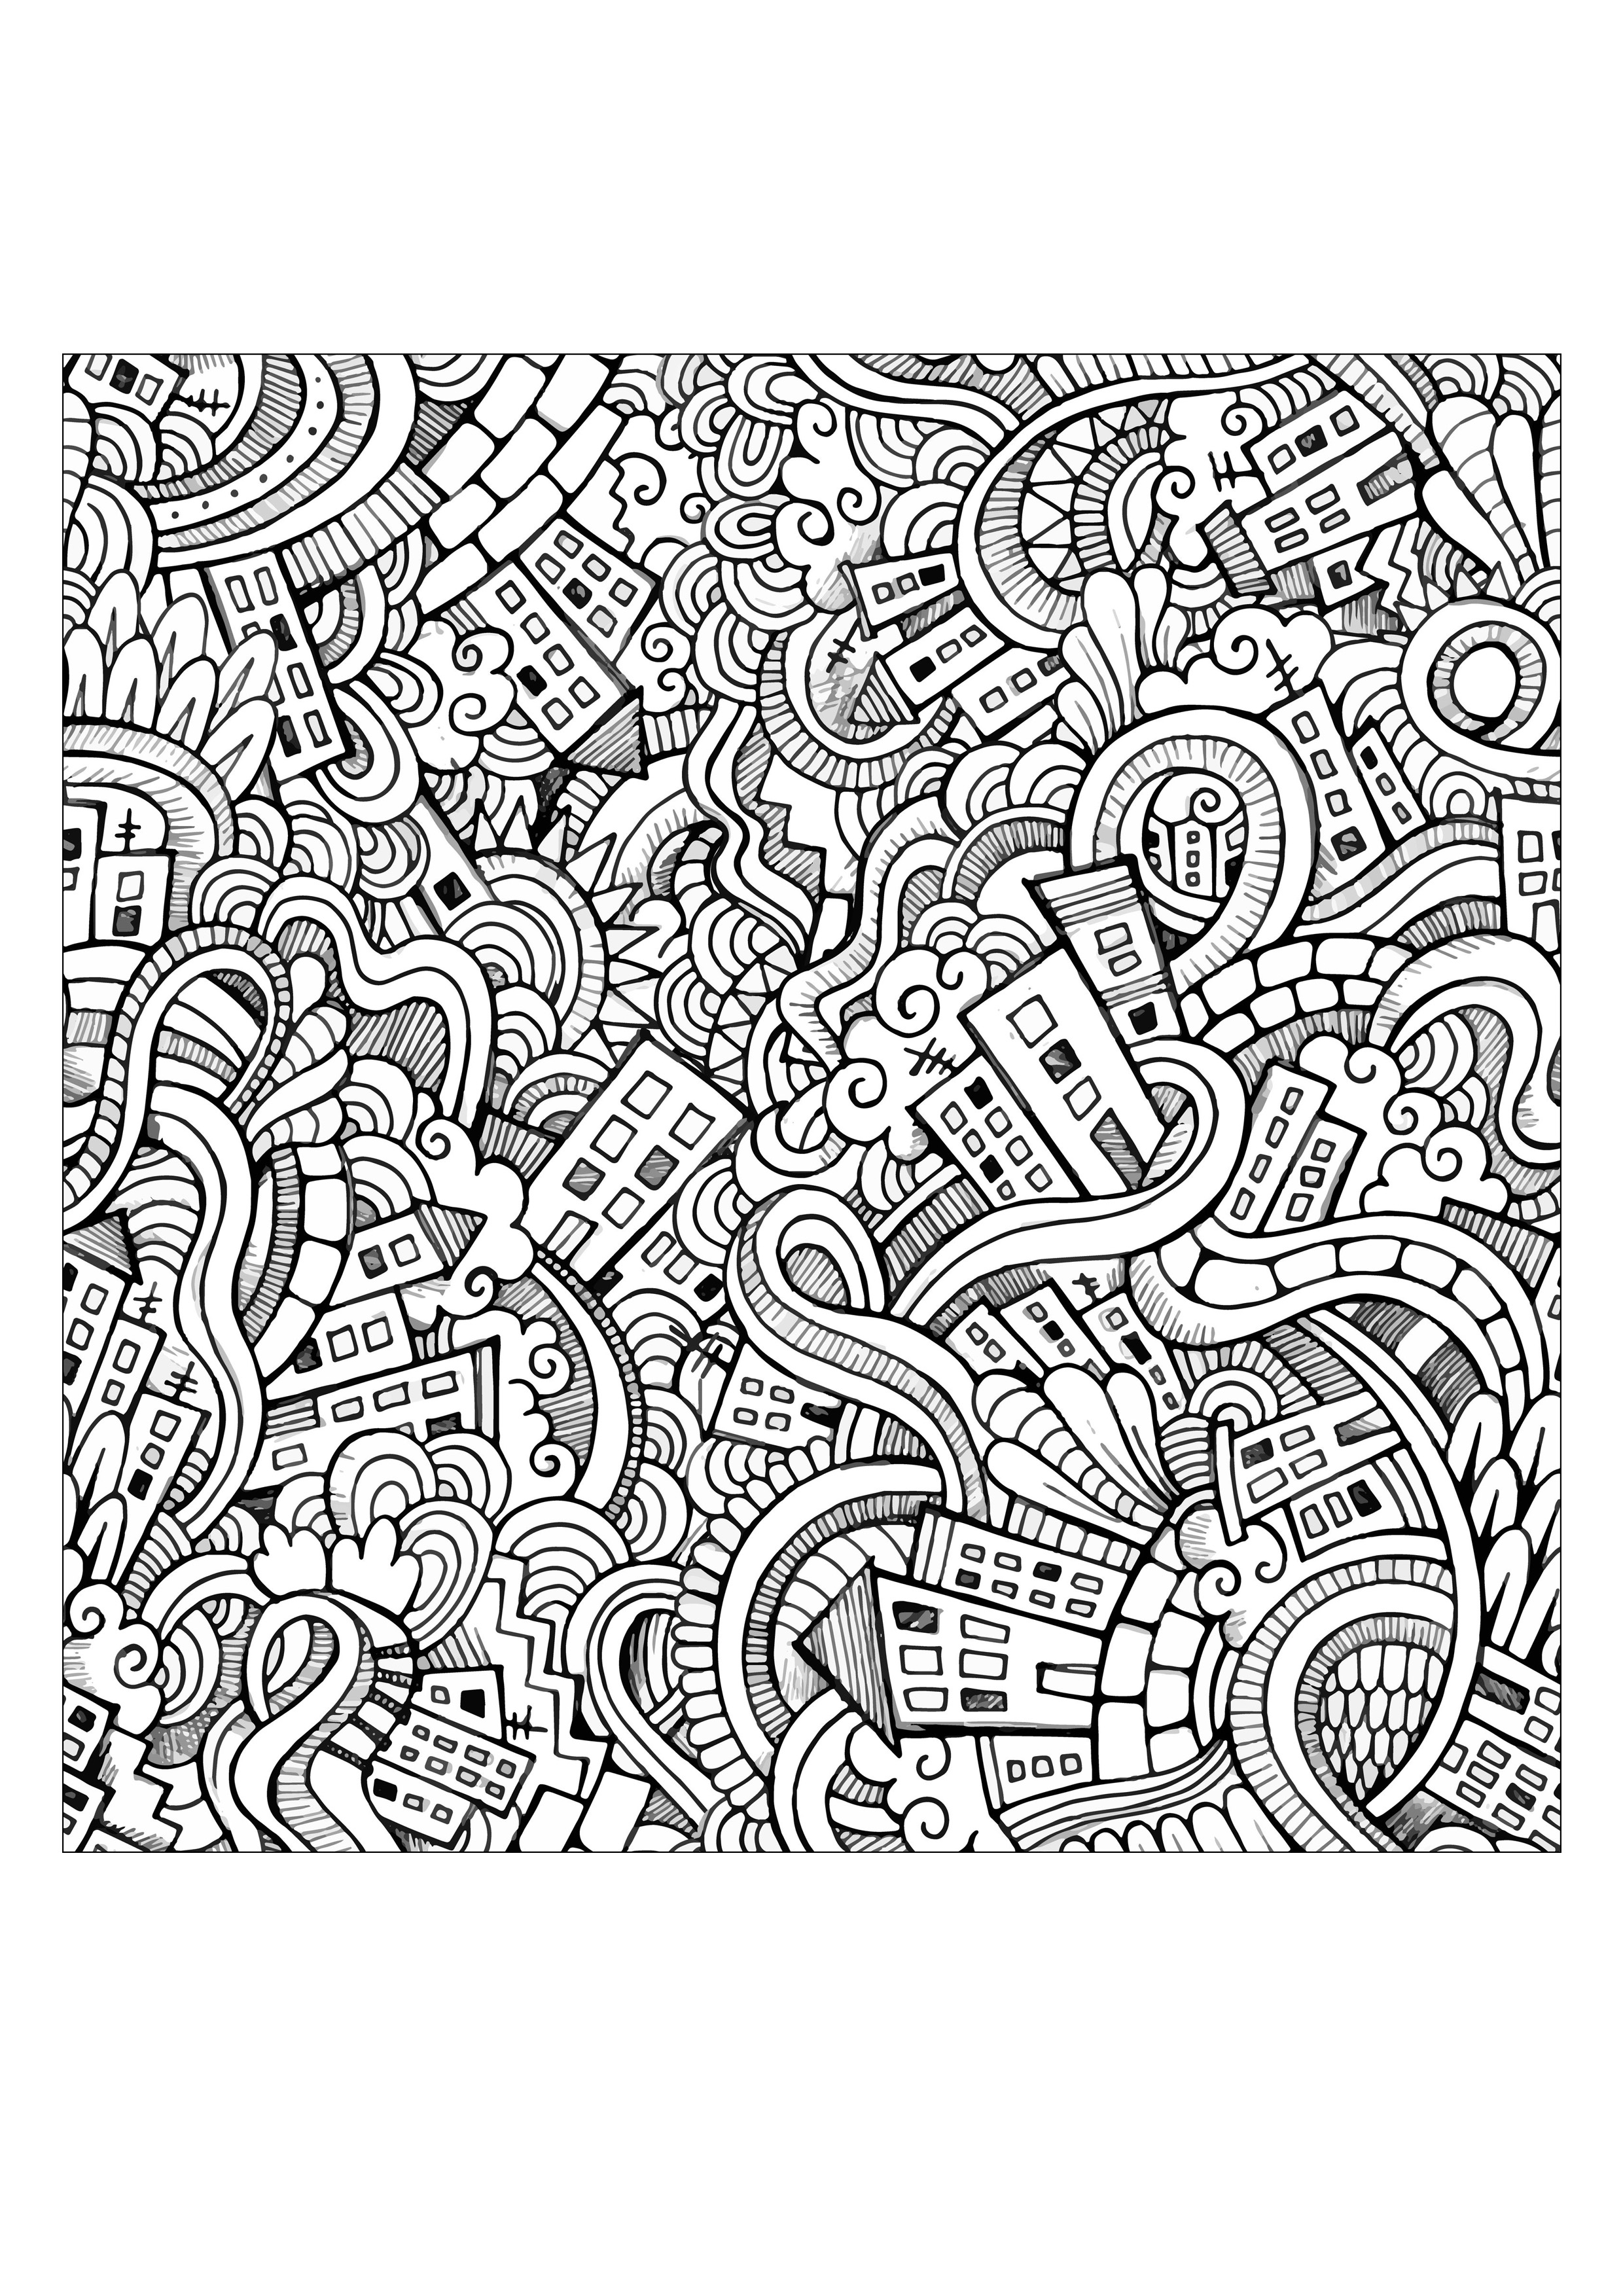 Download Incredible city doodle - Doodle Art / Doodling Adult Coloring Pages - Page 2